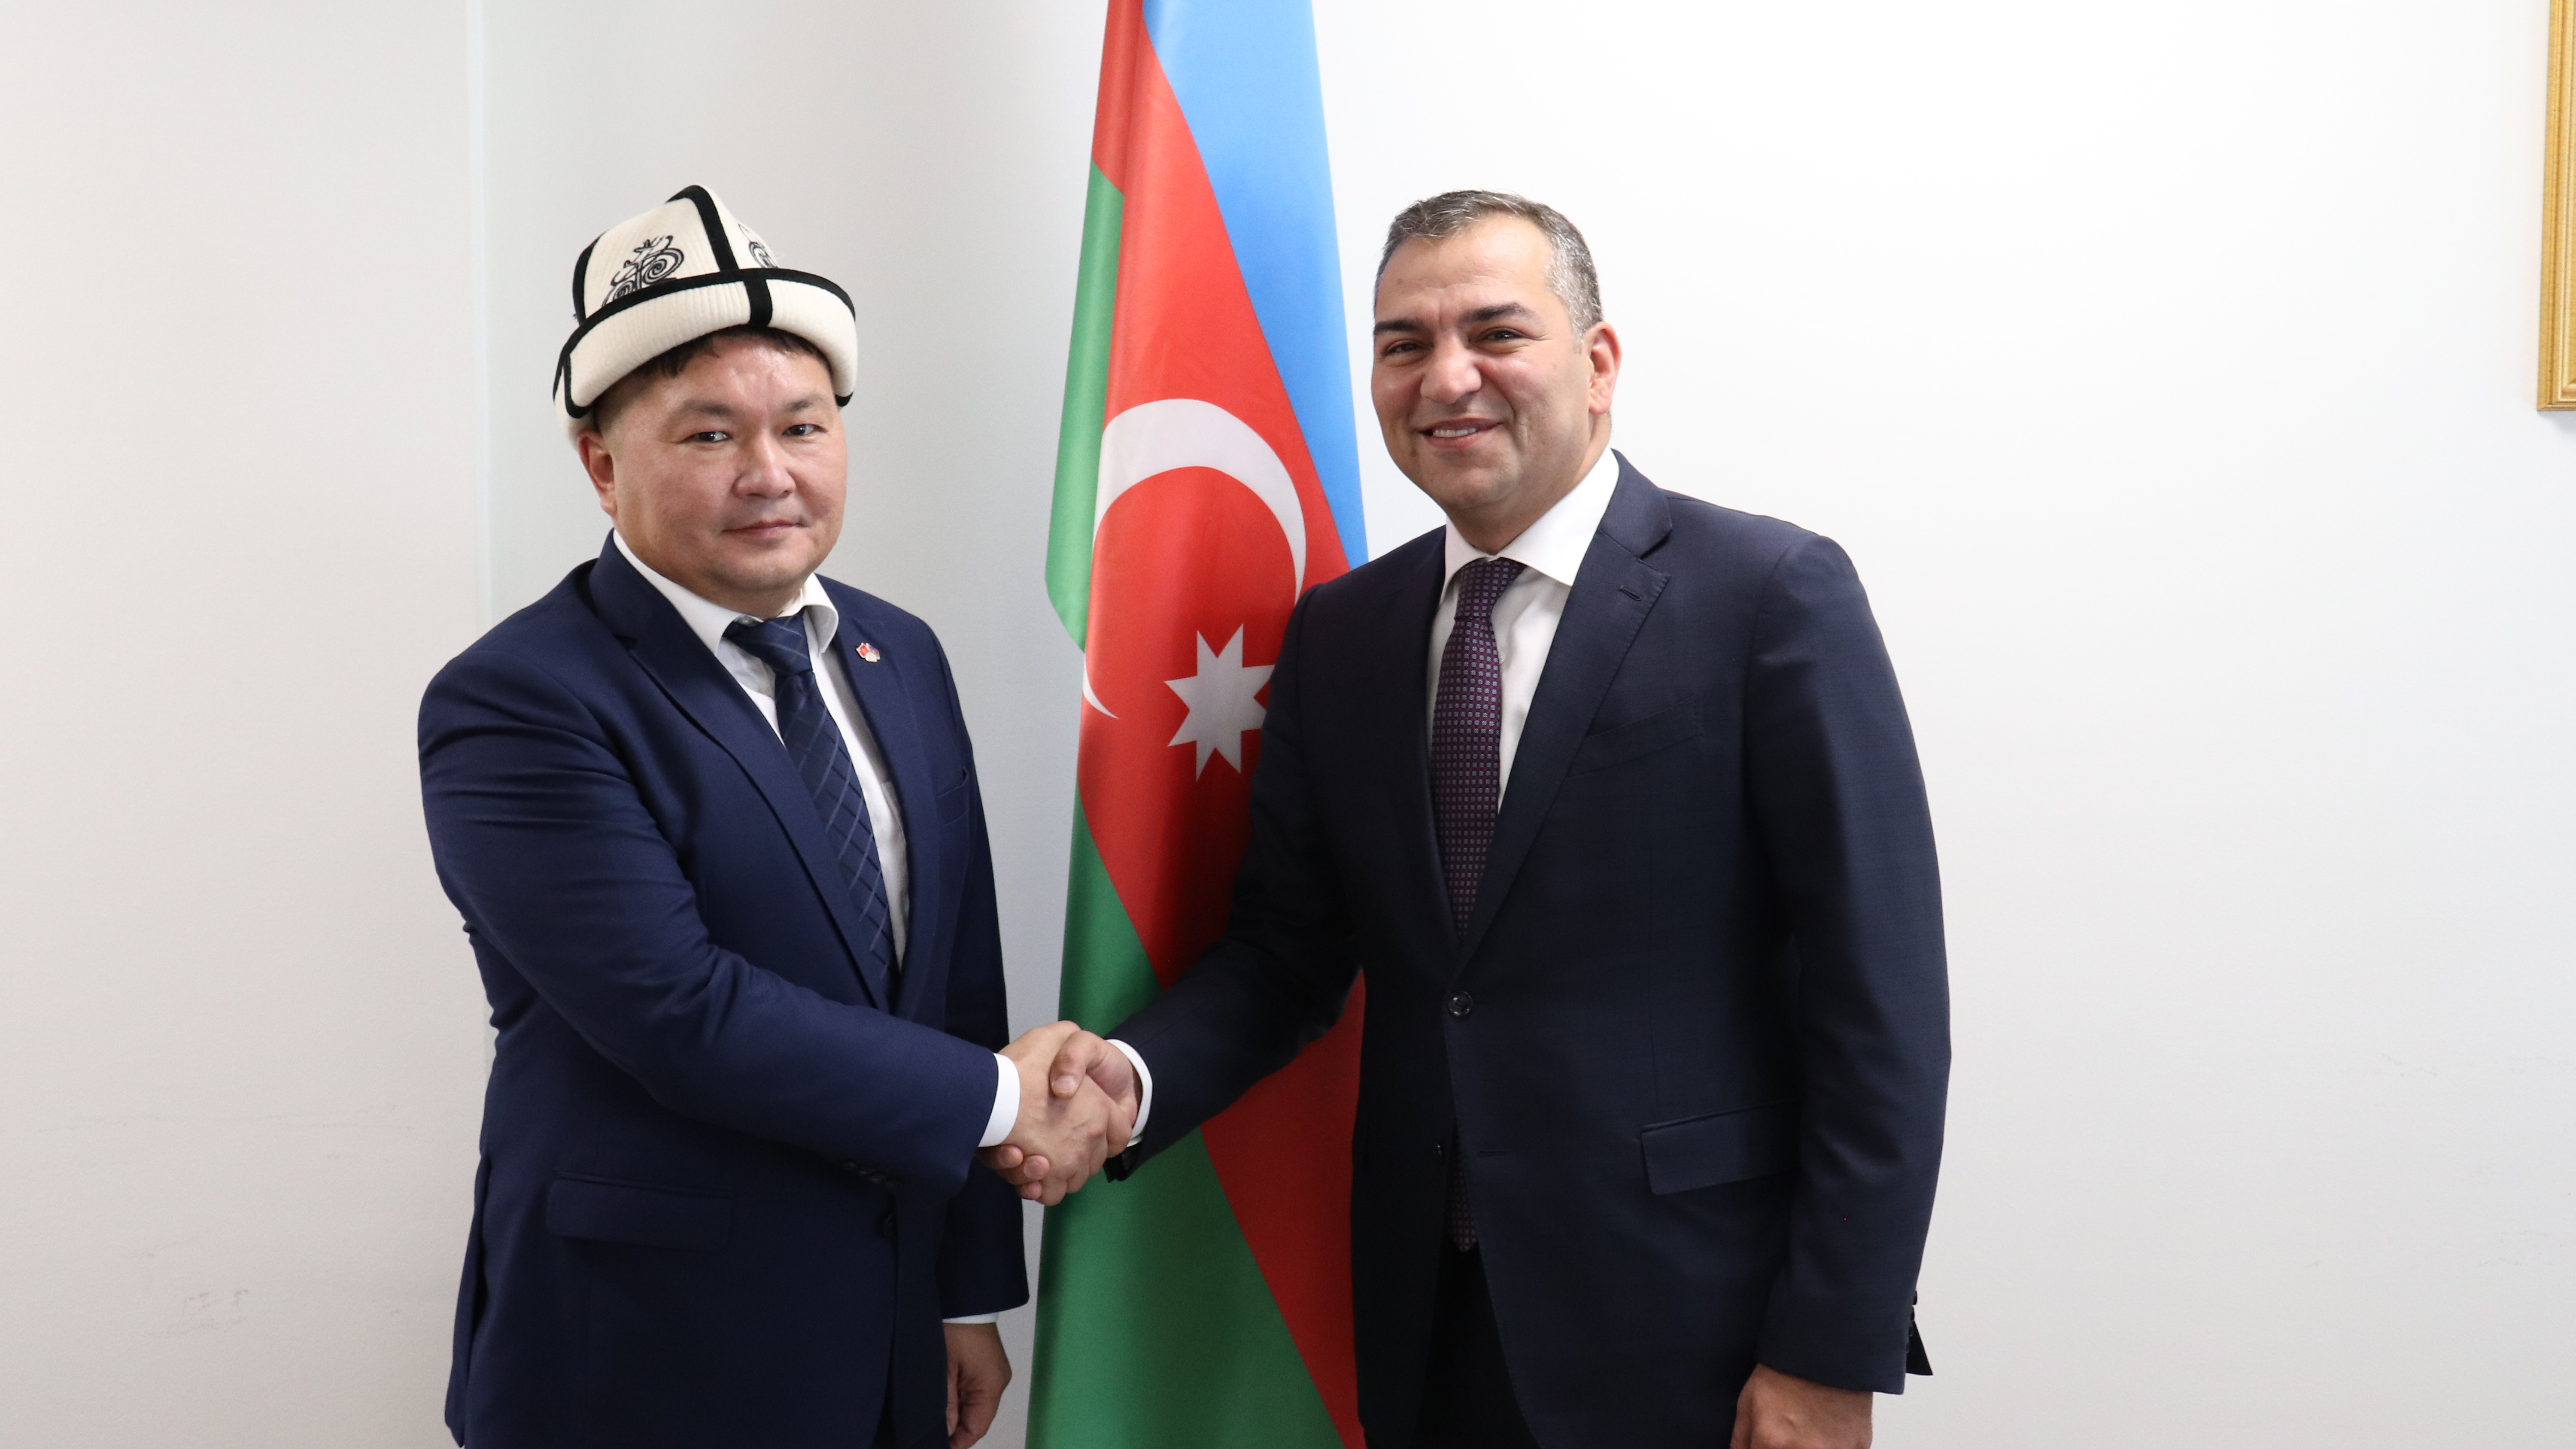 Expansion of tourism relations with Kyrgyzstan was discussed